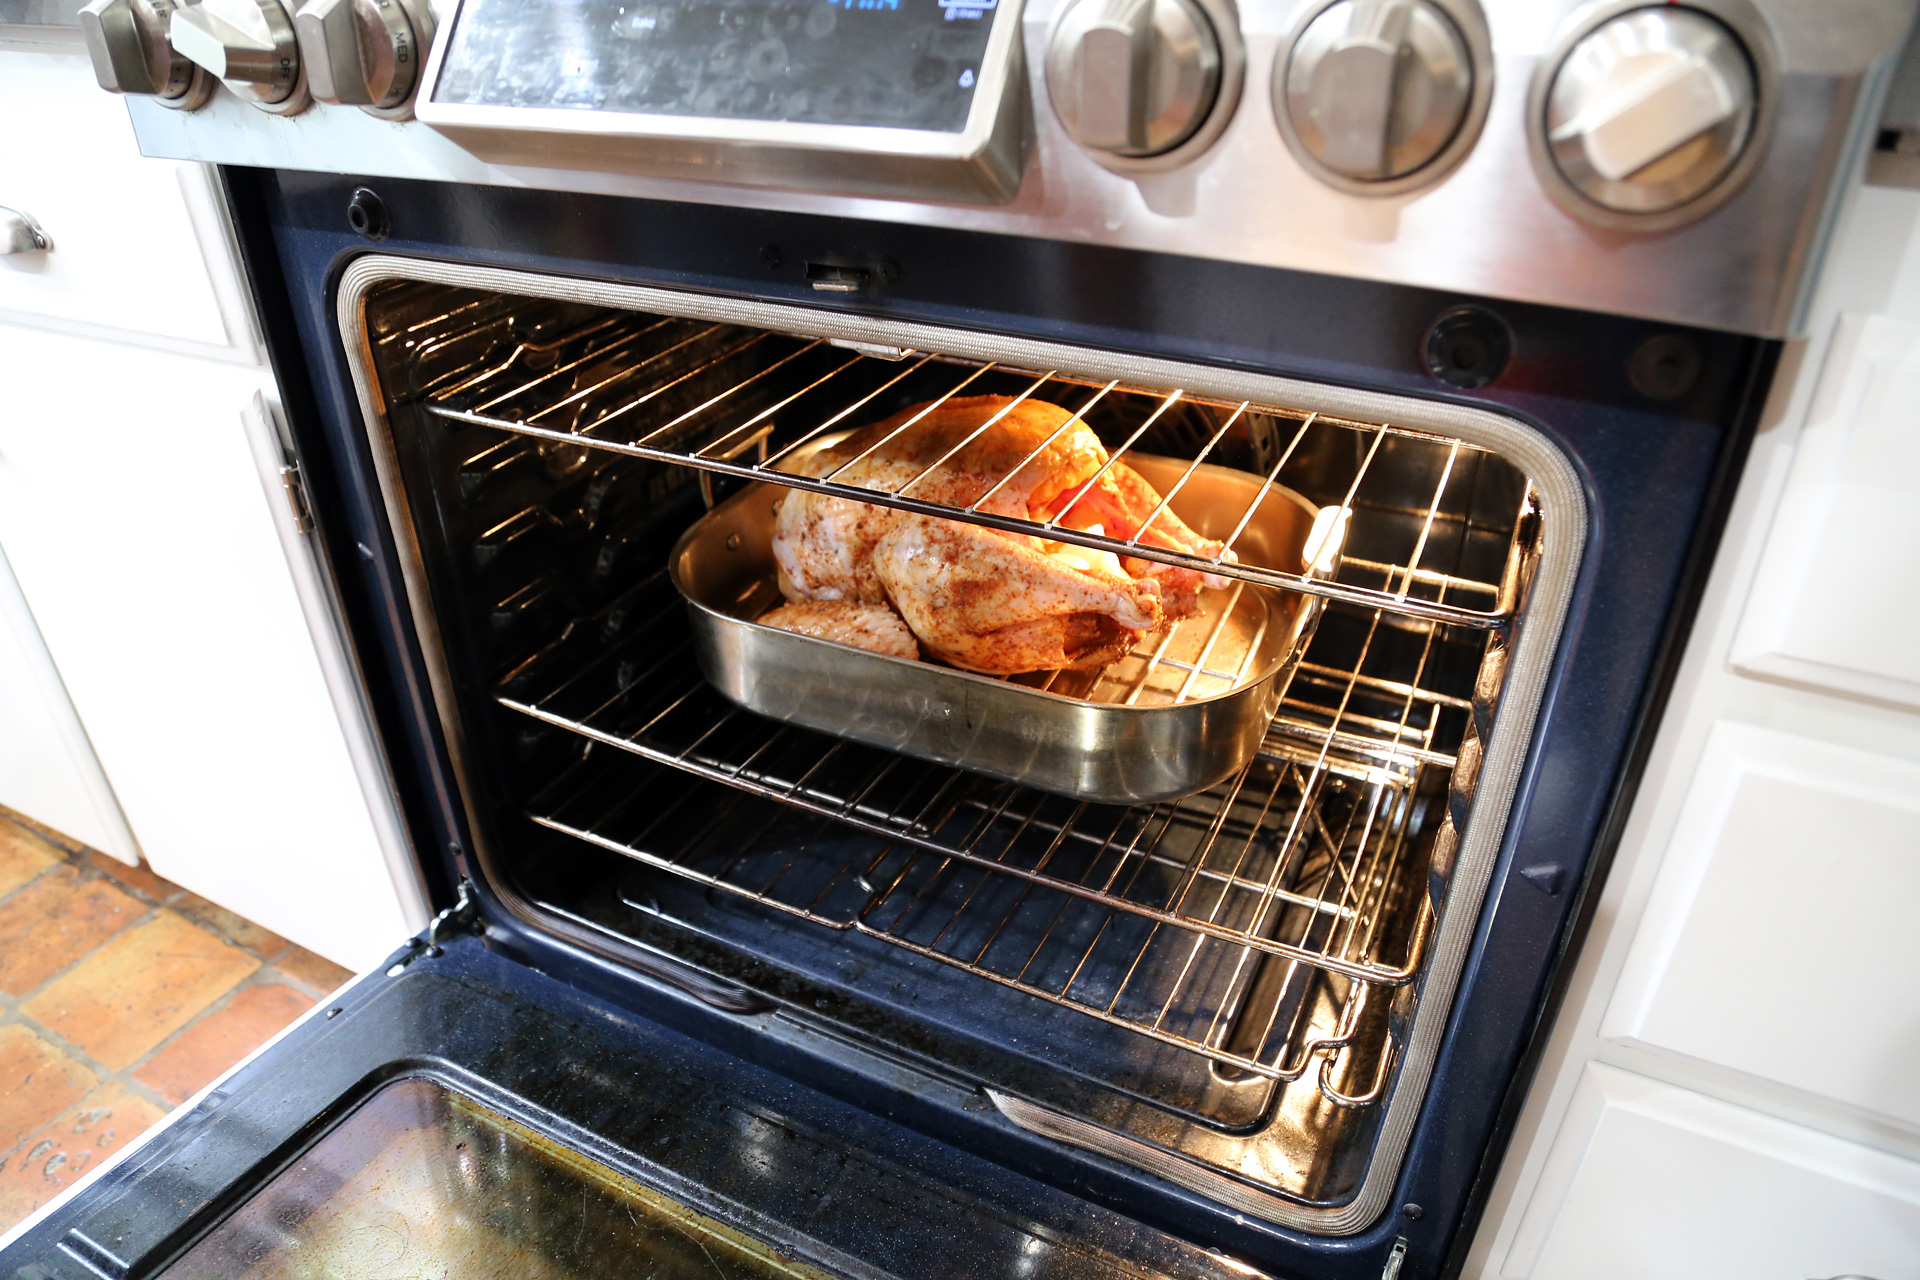 Roast the turkey in the oven per instructions.